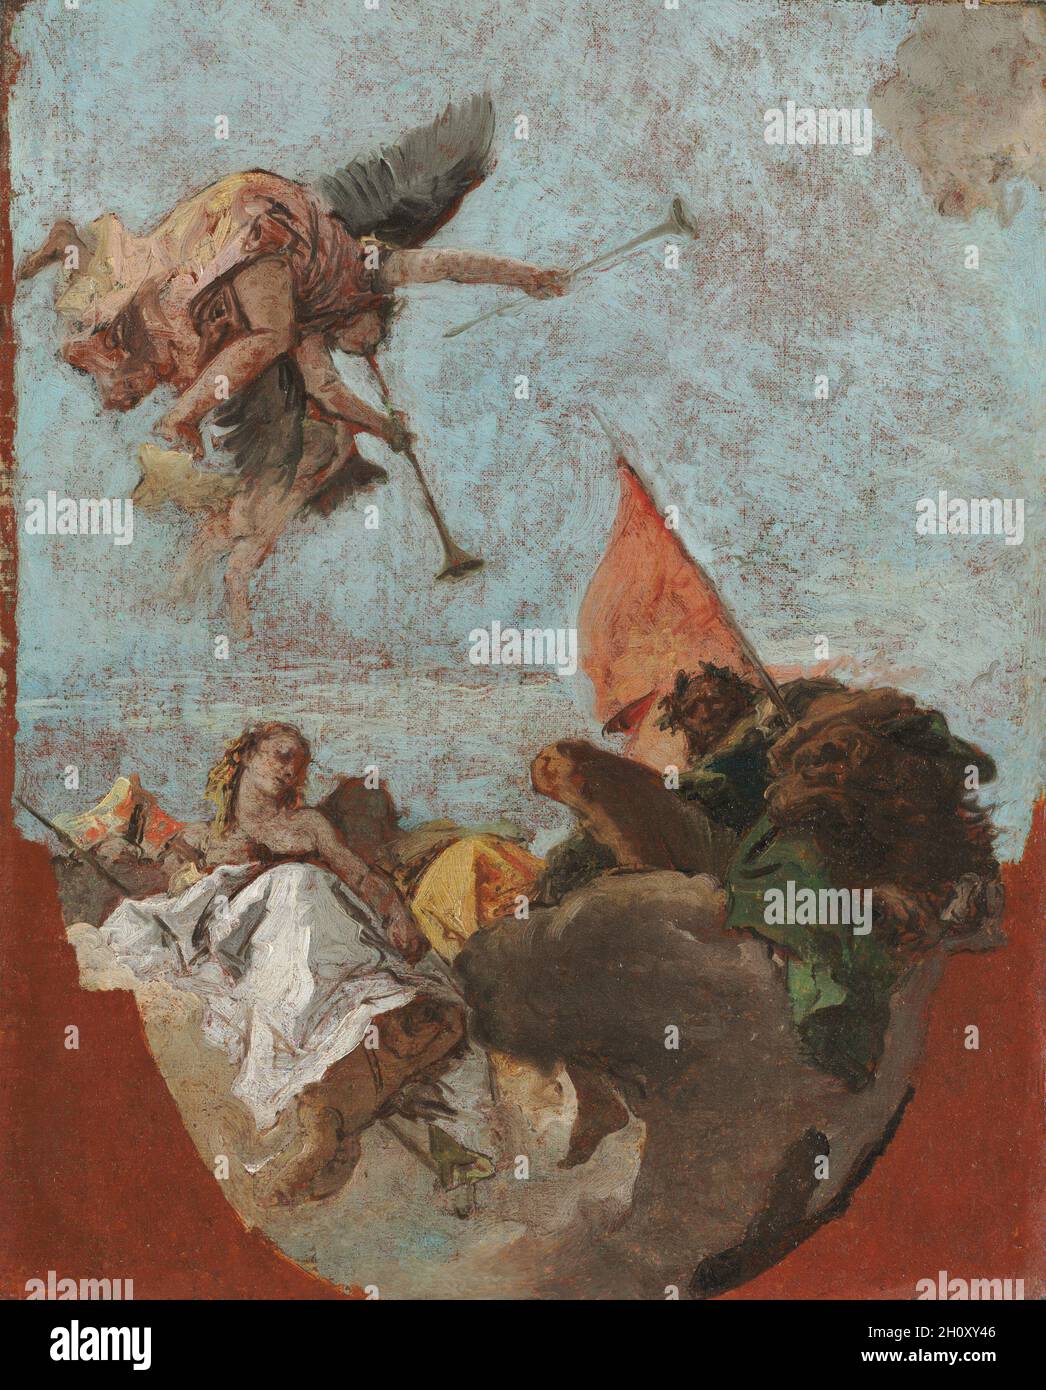 Sketch for a Ceiling, 1750s. Giovanni Battista Tiepolo (Italian, 1696-1770). Oil on canvas; framed: 51.5 x 43 x 6.5 cm (20 1/4 x 16 15/16 x 2 9/16 in.); unframed: 41 x 34 cm (16 1/8 x 13 3/8 in.).  This small, quickly painted picture is typical of the sketches Tiepolo made as studies for larger compositions. When completed full-scale on a ceiling, works like these give the impression of a massive window, through which one can see angels or mythological beings floating among the clouds. Although we know from the work's shape that it was a study for a ceiling painting, it is not related to any o Stock Photo